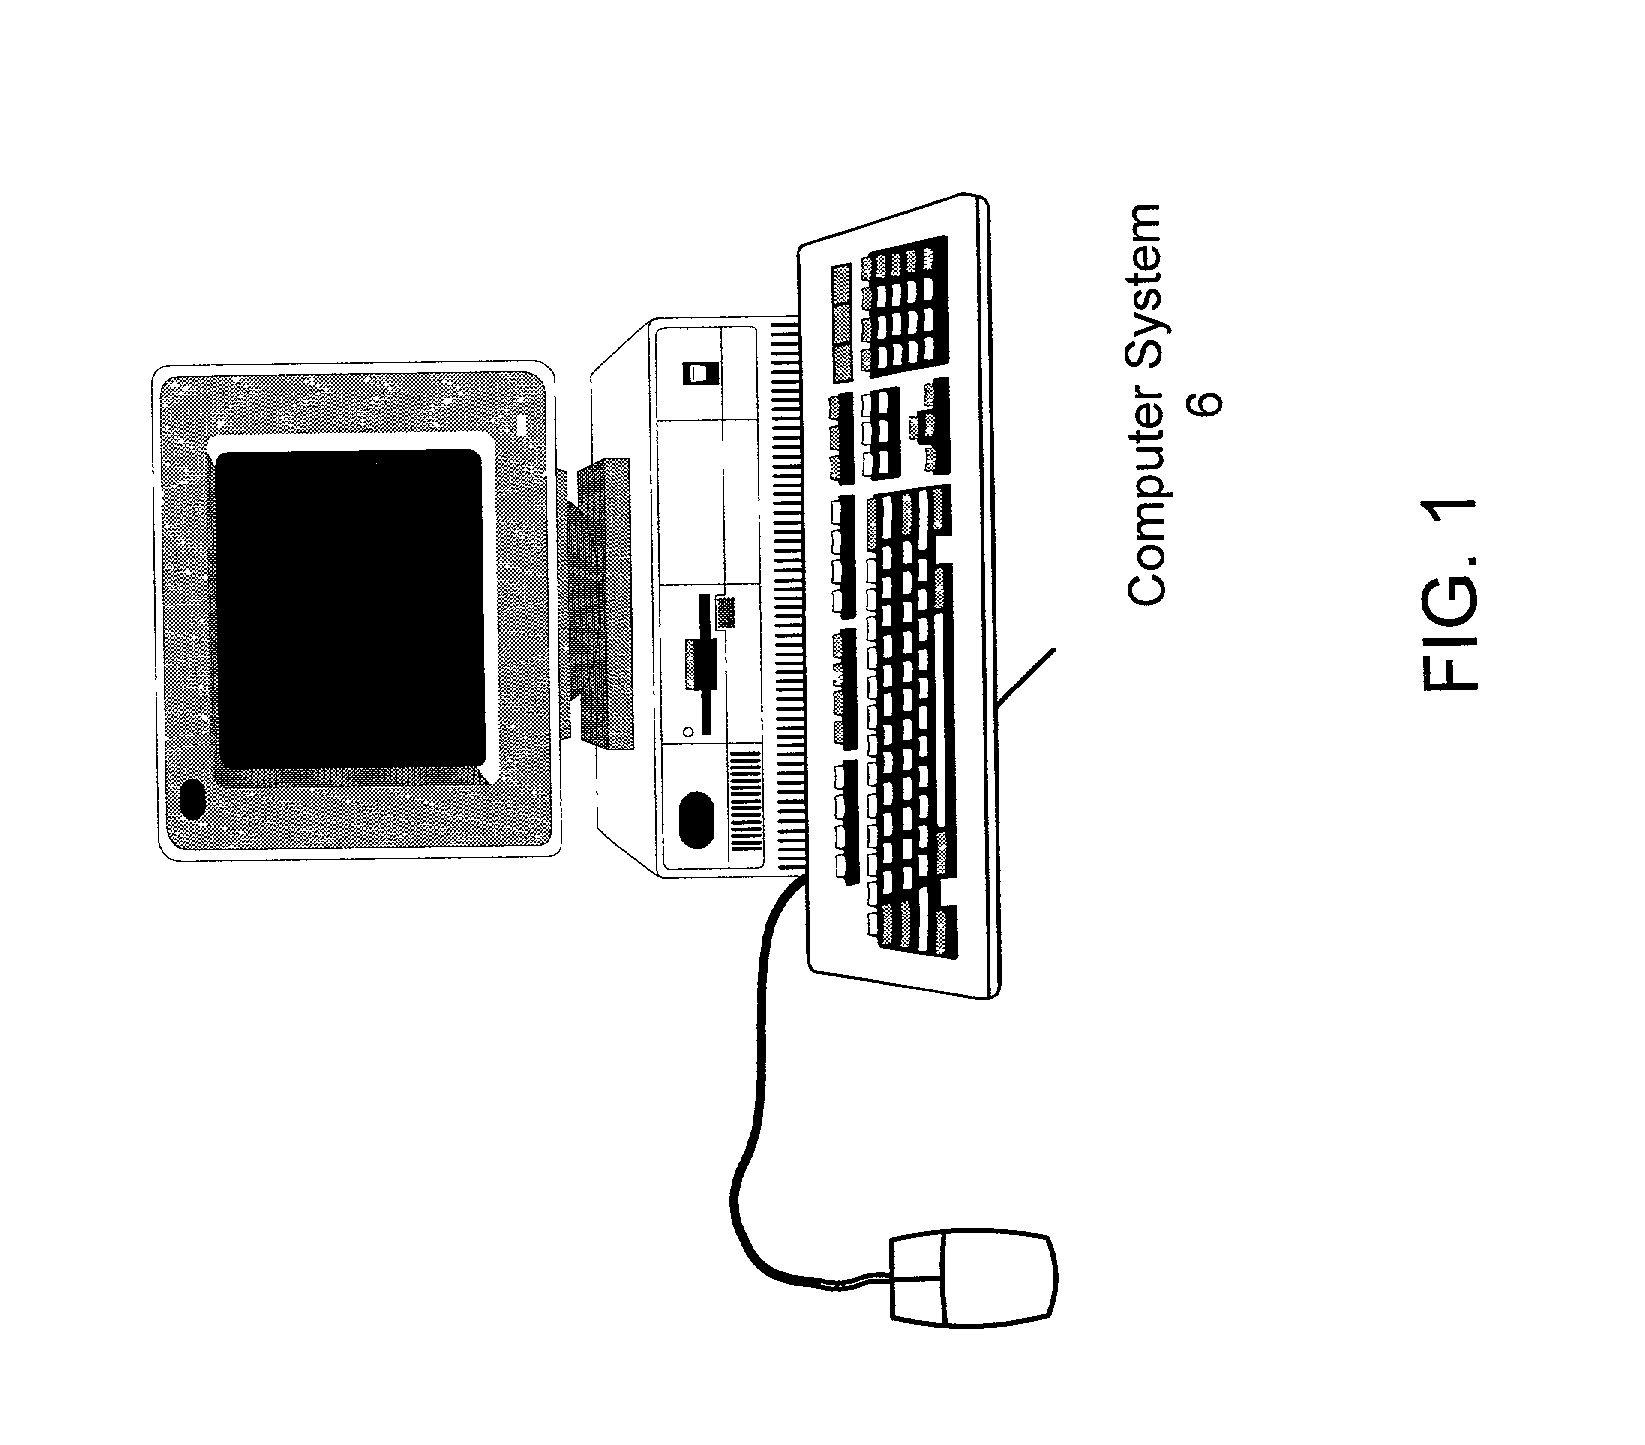 System and method for on-line training of a non-linear model for use in electronic commerce